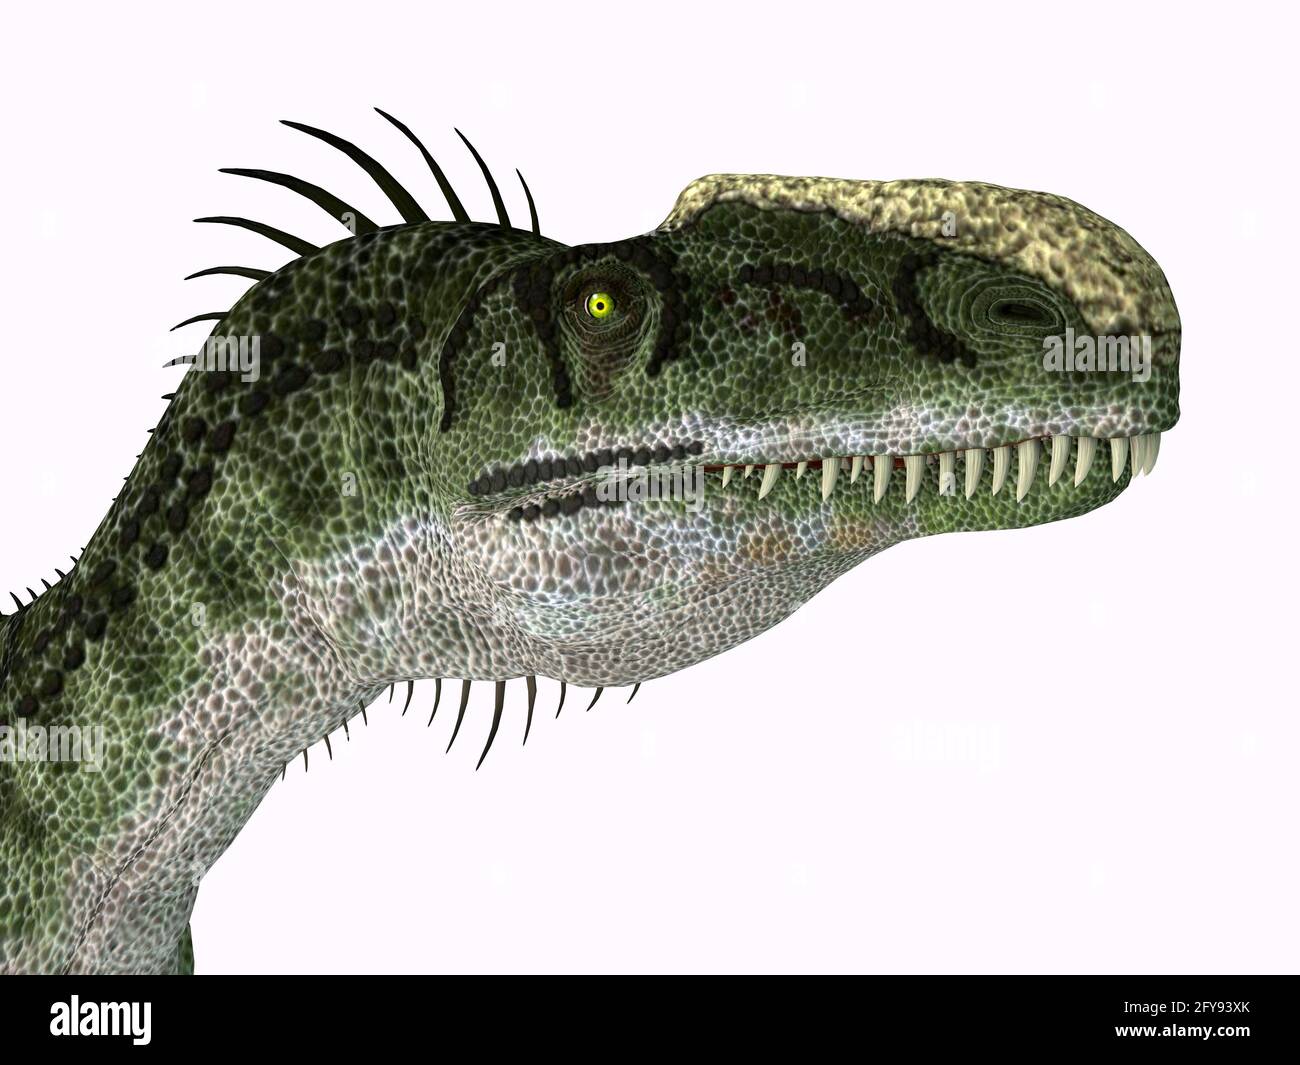 Monolophosaurus was a carnivorous theropod dinosaur that lived in China during the Jurassic Period. Stock Photo